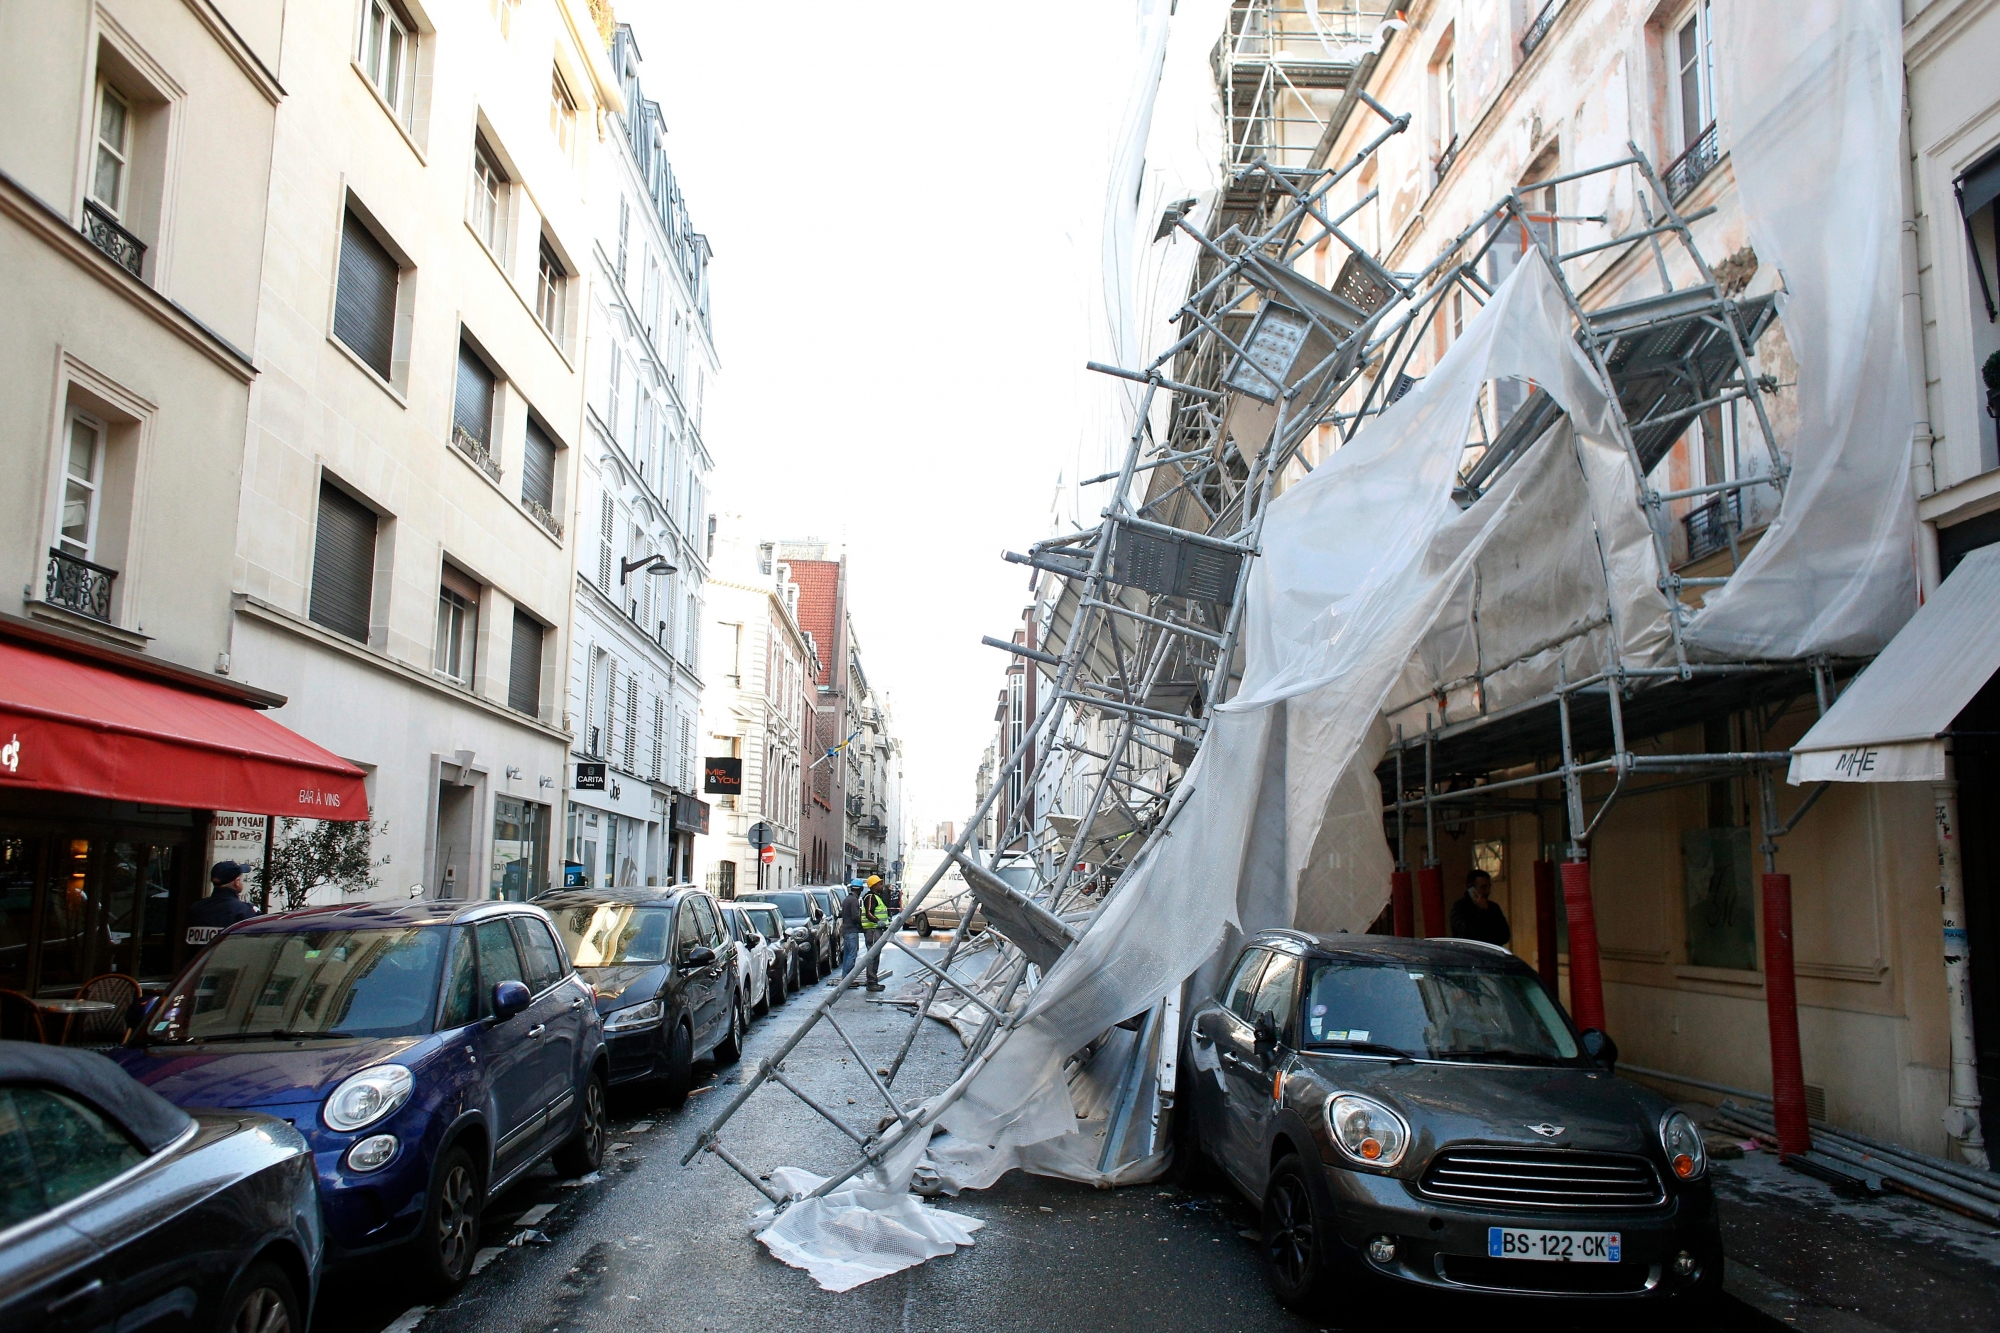 A scaffolding collapsed due to a violent windstorm, in Paris, Wednesday, Jan. 3, 2018, as France's national electricity provider reports 200,000 households without electricity across the country, including 30,000 in the Paris region due to storm damage. A severe storm packing winds of up to 100 miles per hour has battered much of Europe overnight and Wednesday morning, bringing heavy rain, hail and lightning to the region. (AP Photo/Thibault Camus) France Storm